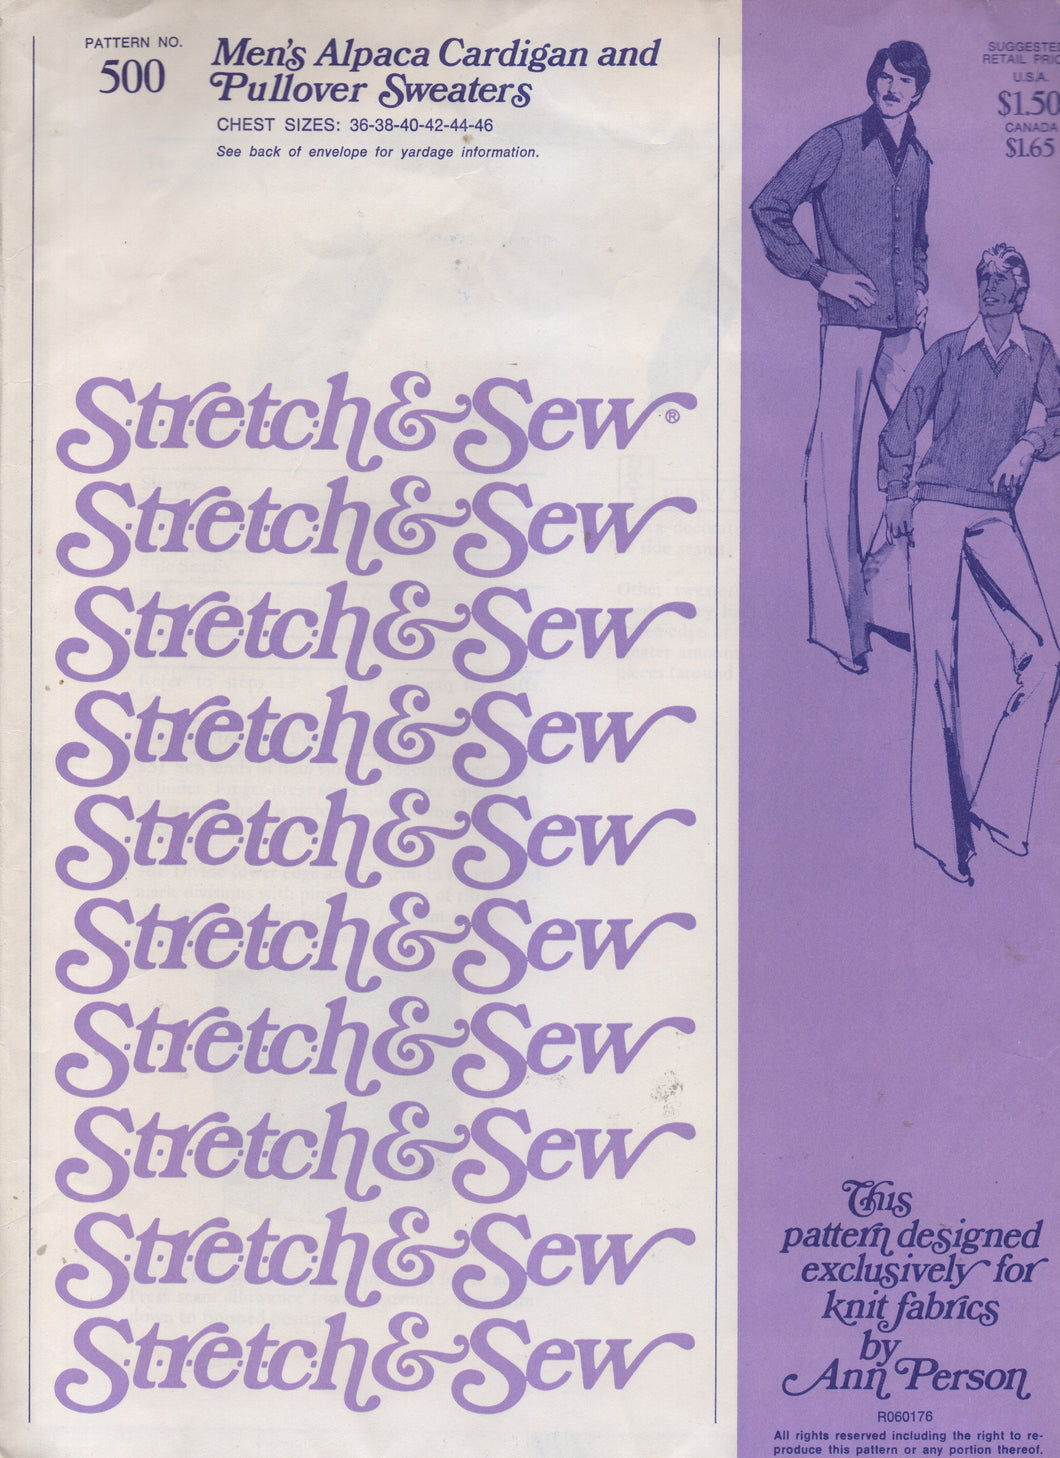 1970's Stretch & Sew Men's Alpaca Cardigan and Pullover Sweaters pattern - Chest 36-46